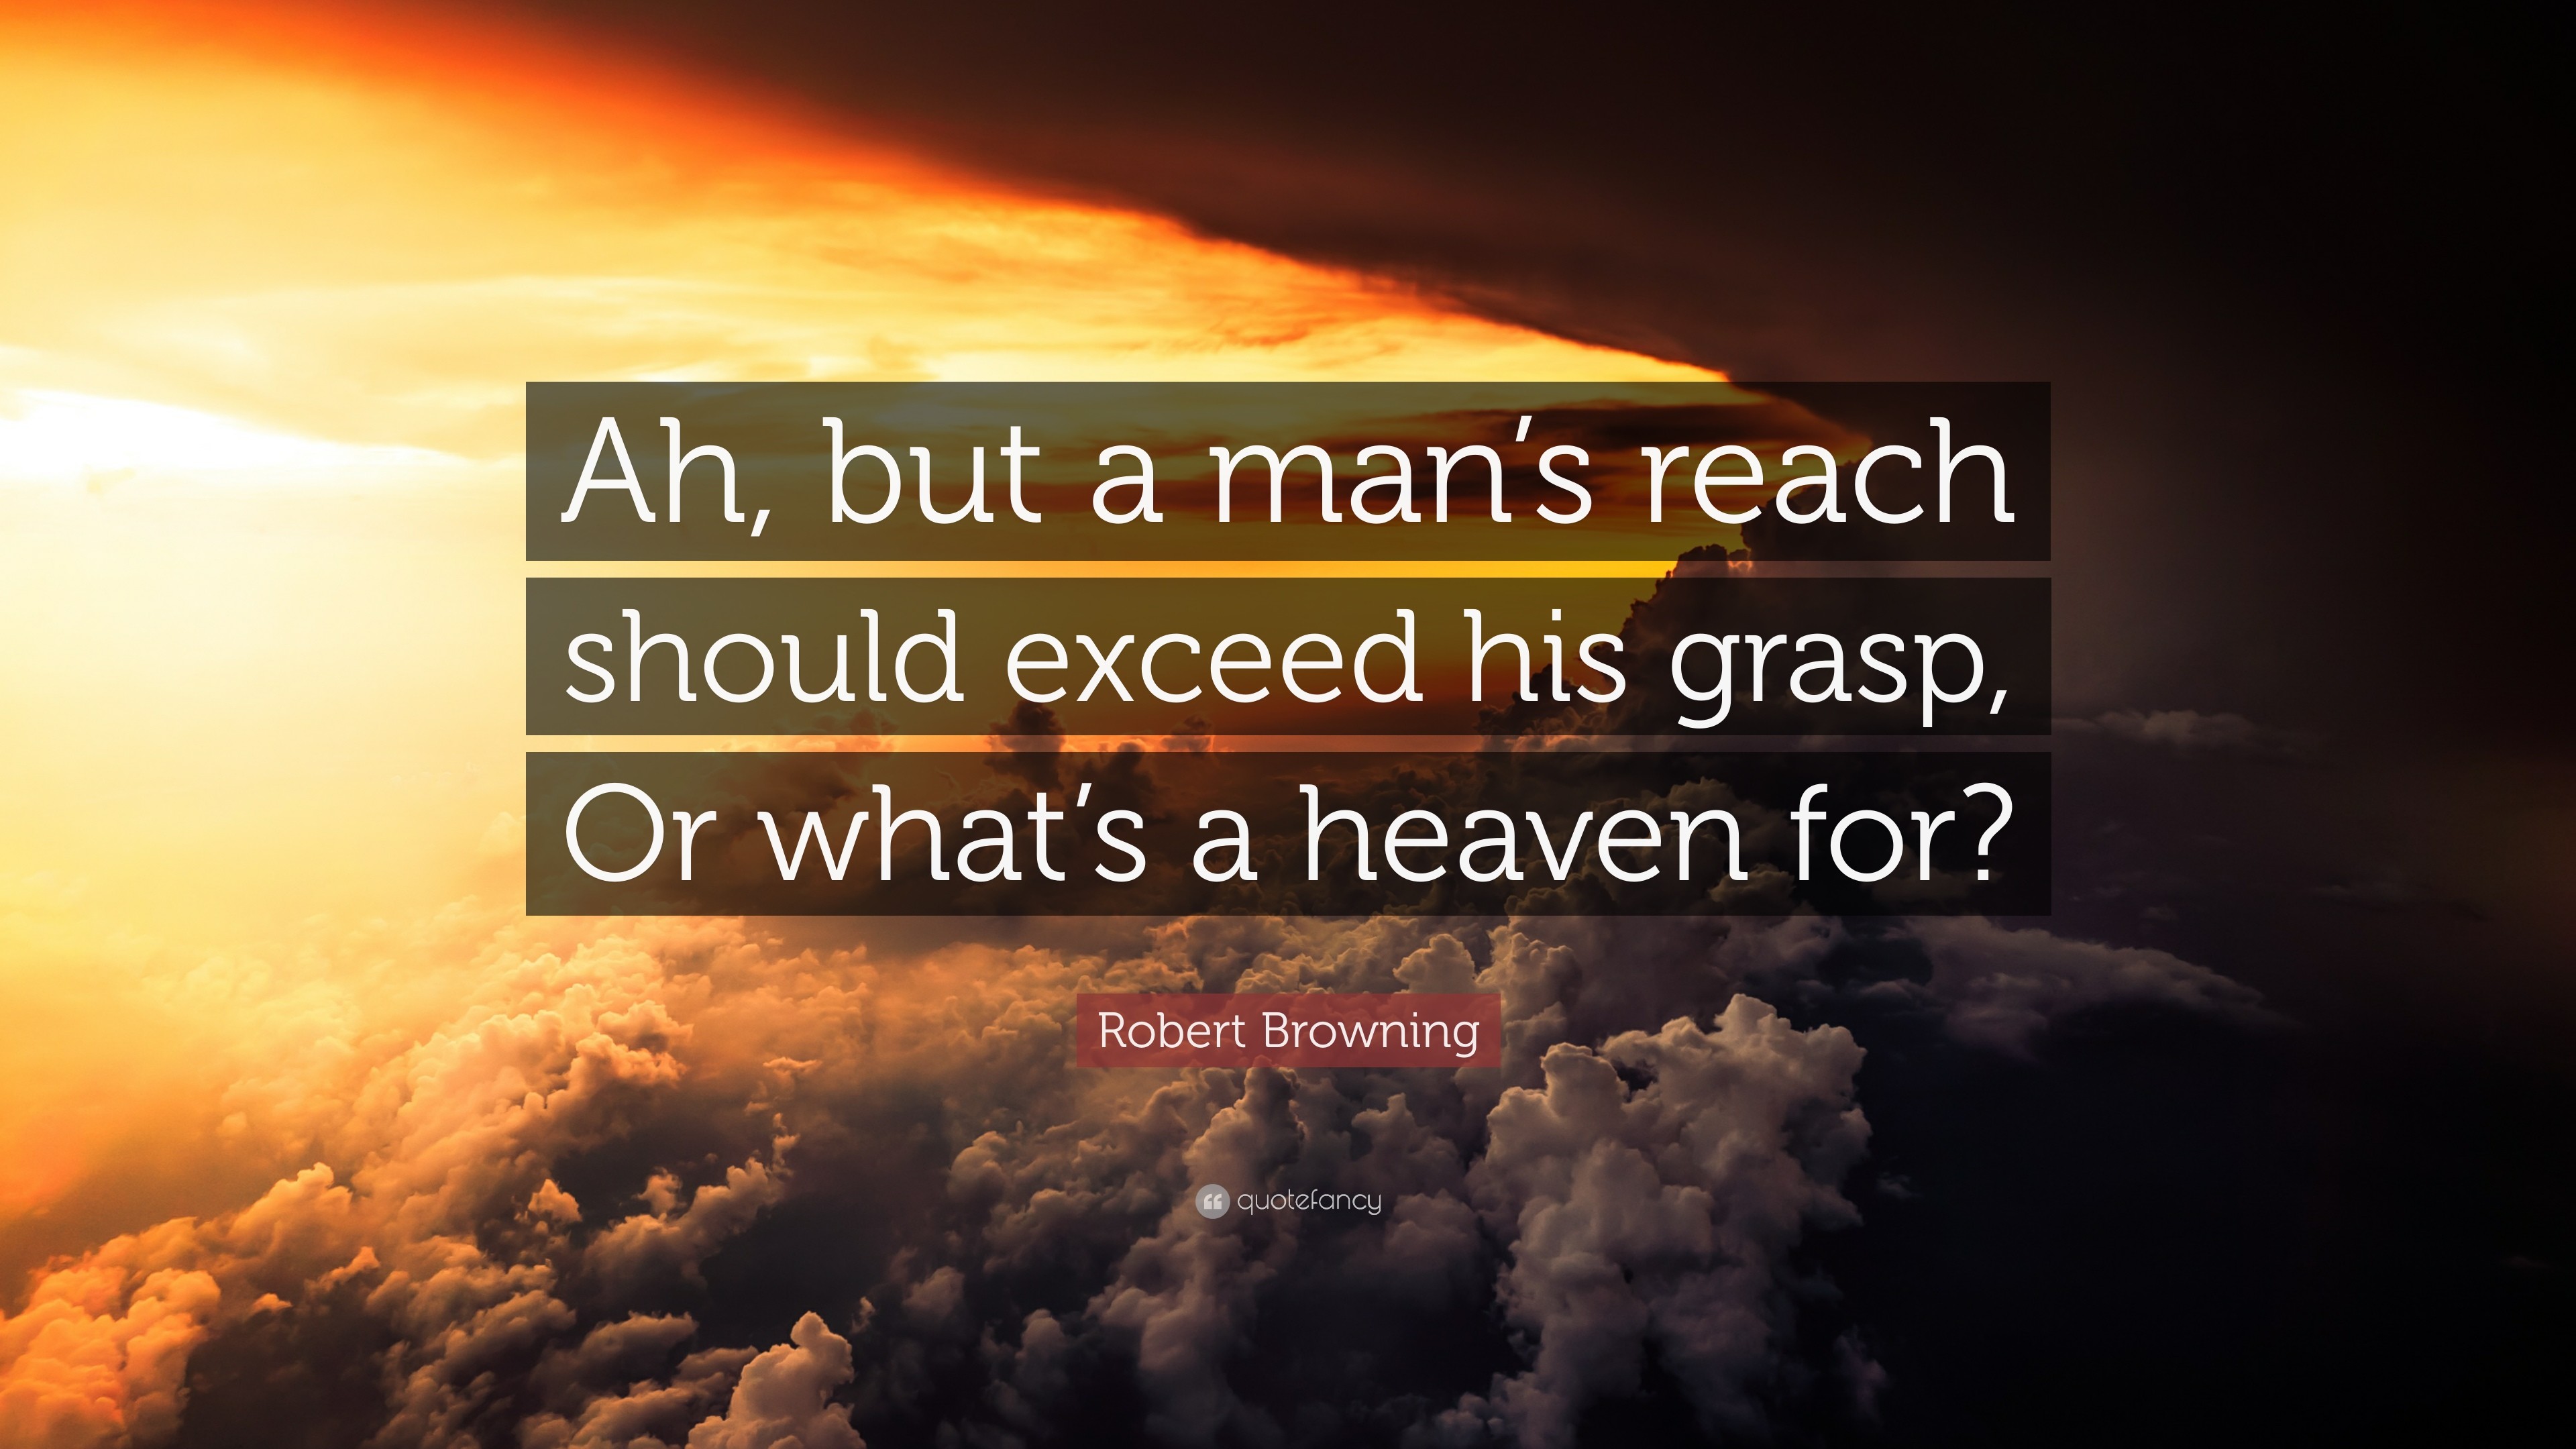 3840x2160 Robert Browning Quote: “Ah, but a man's reach should exceed his grasp,